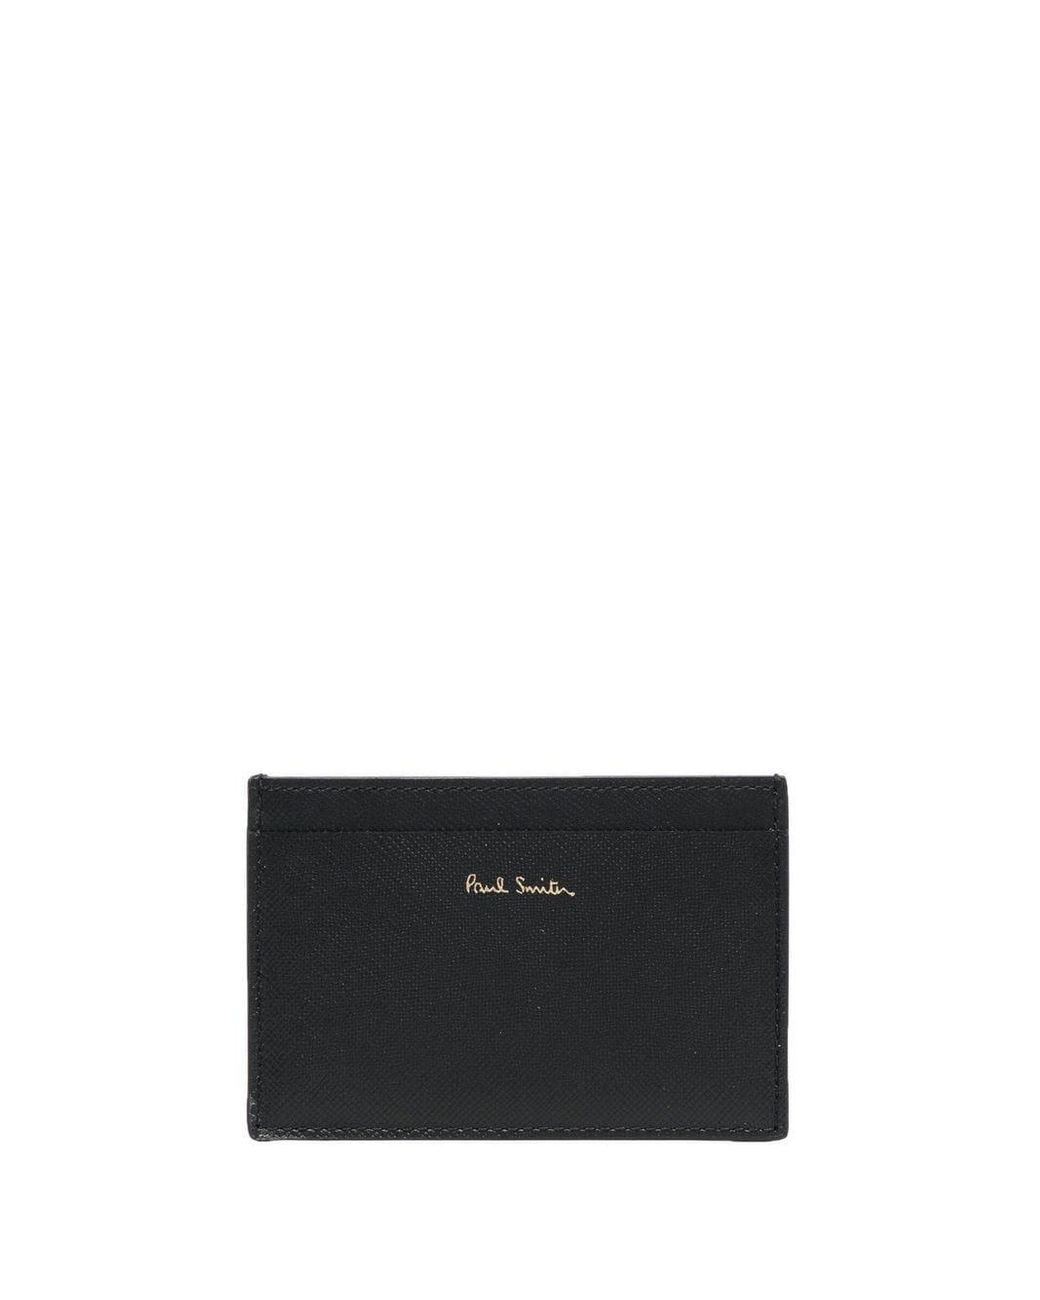 Paul Smith Graphic-print Leather Wallet in Black for Men | Lyst